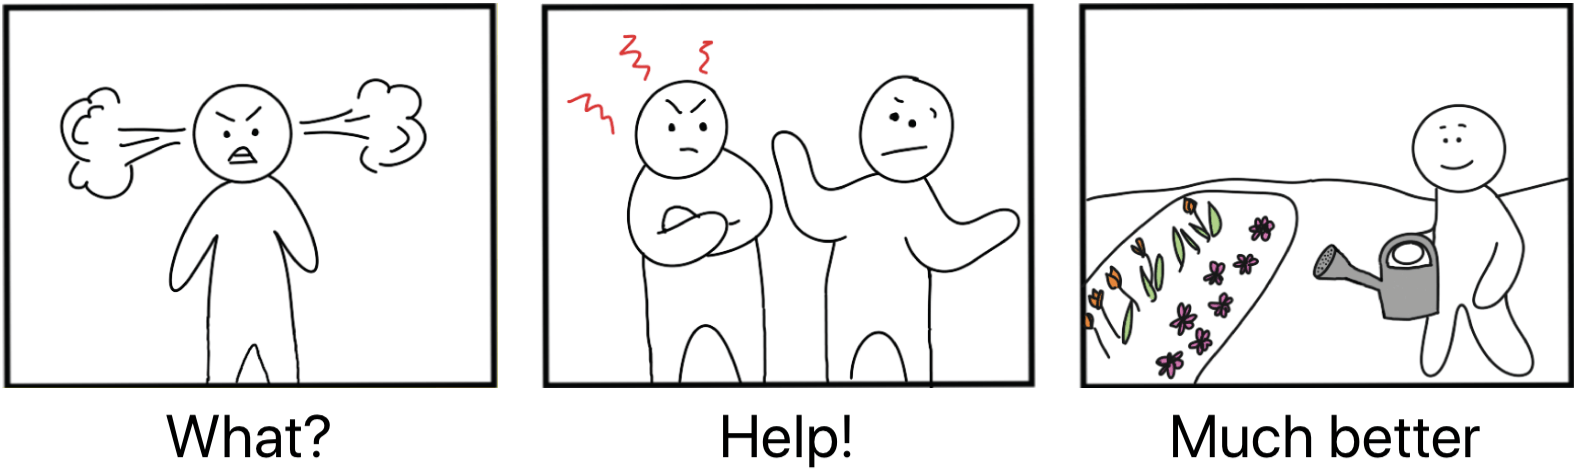 Three panel stick figure comic strip. Panel 1: angry person shown with steam coming from their ears above the caption “What?”. Panel 2: Two people – one looks angry, the other confused - above the caption “Help!”. Panel 3: person looking happy and watering a flowerbed above the caption “Much better”.